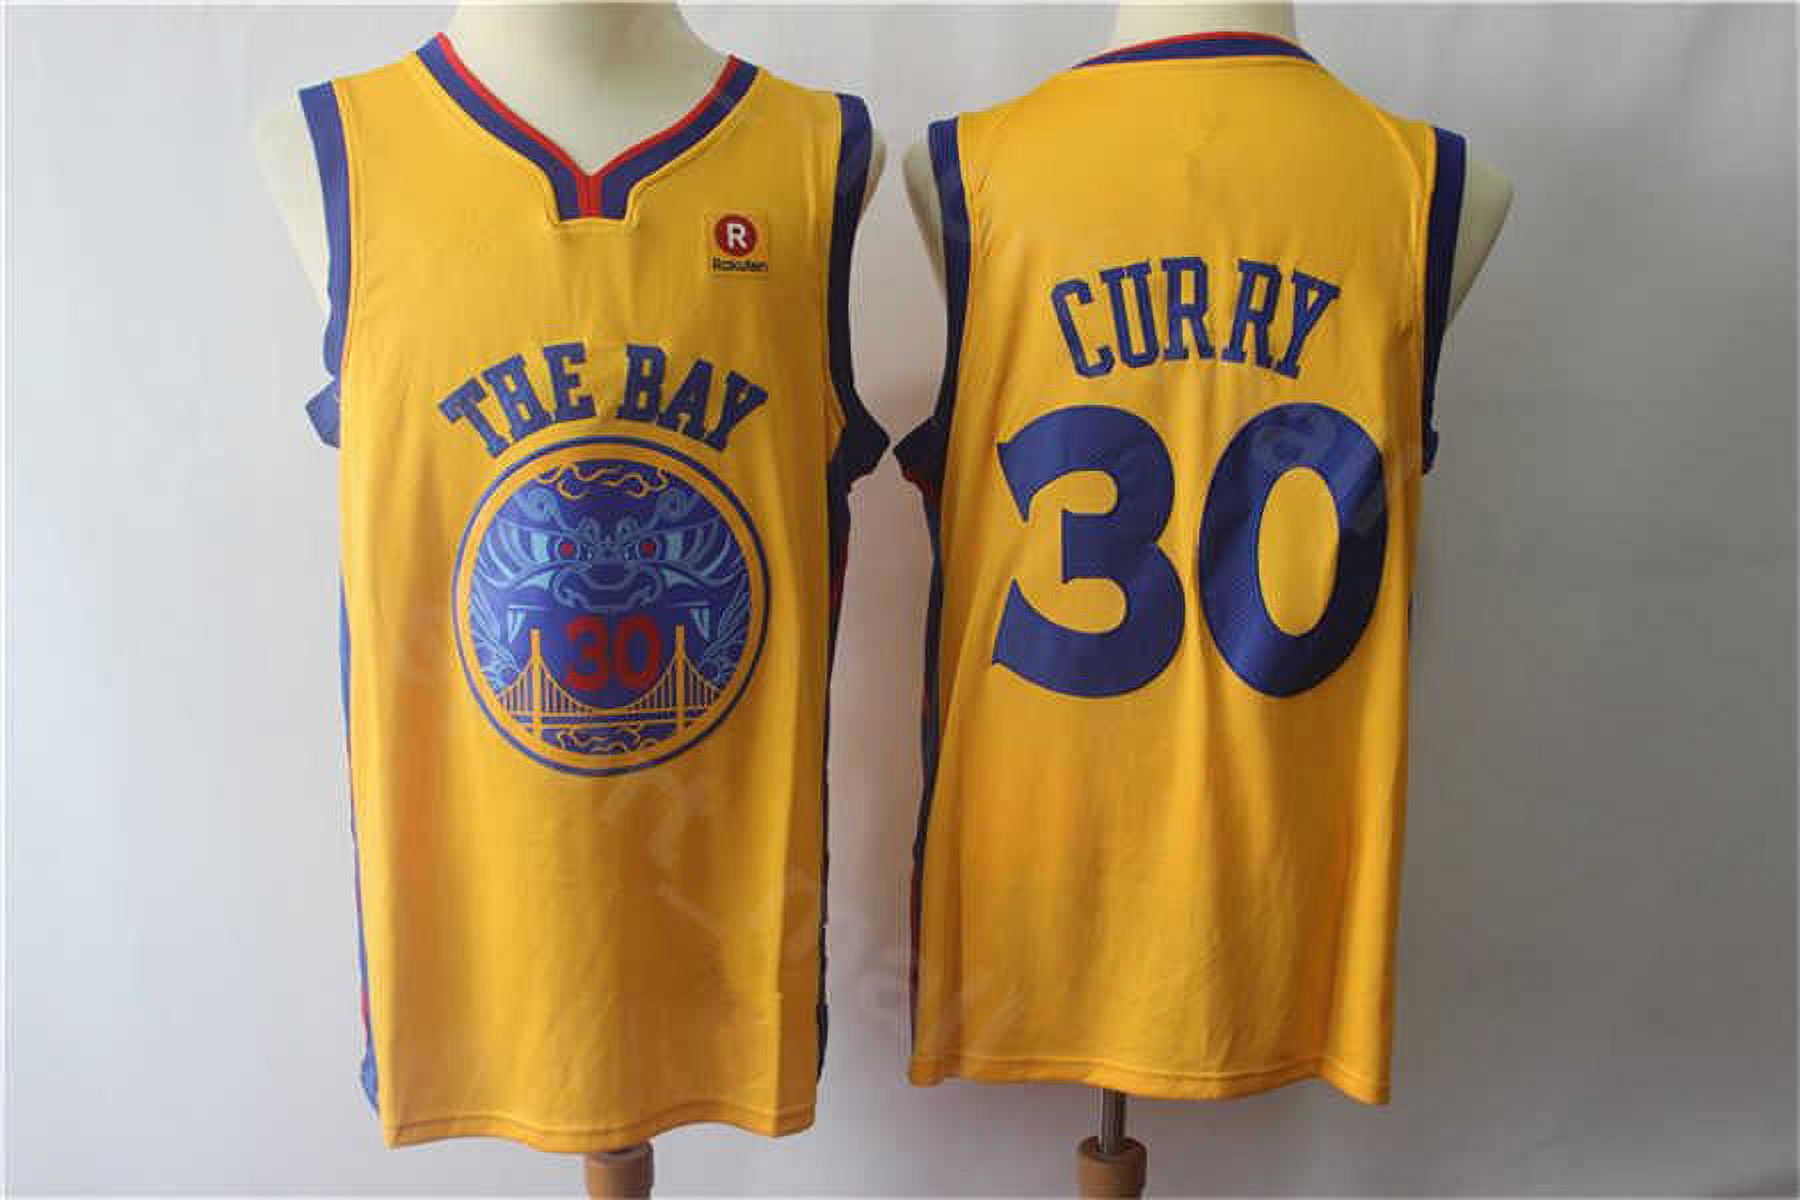 the bay steph curry jersey